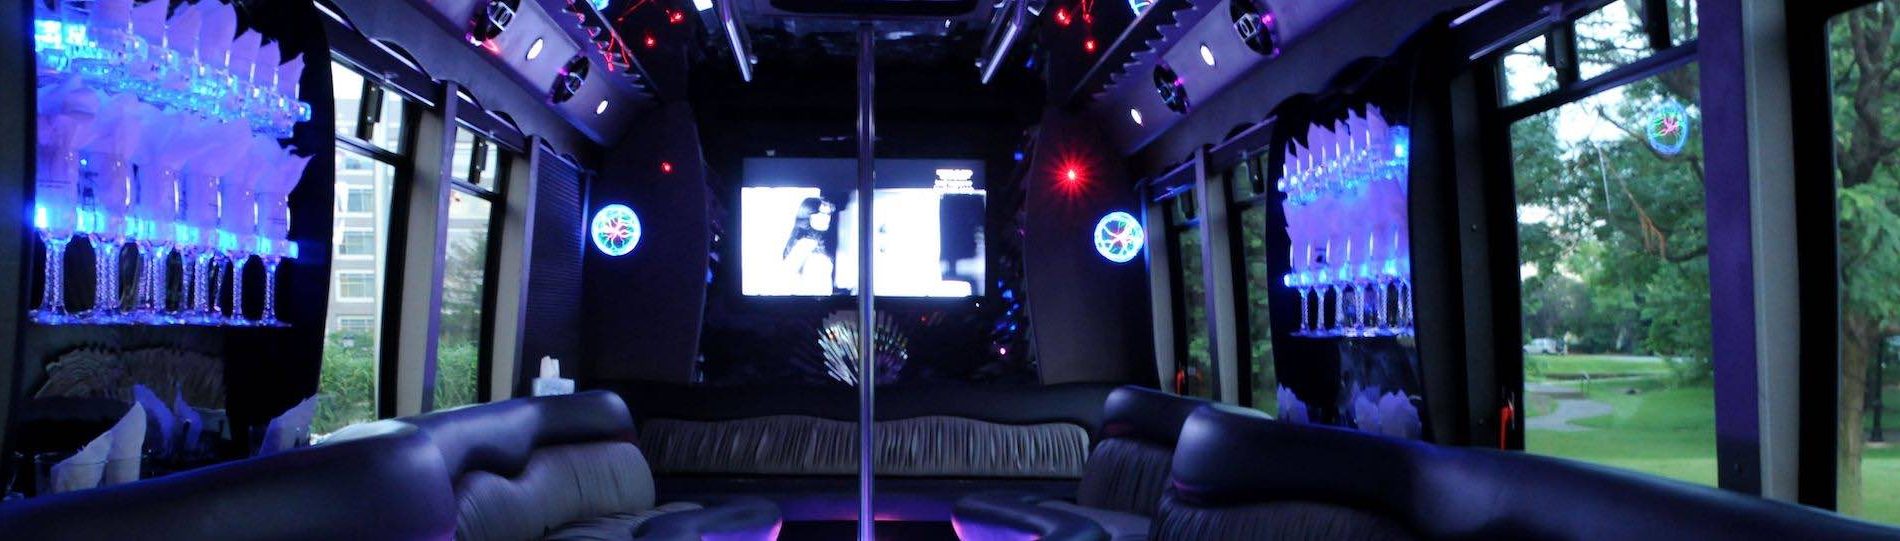 byron bay party bus hire